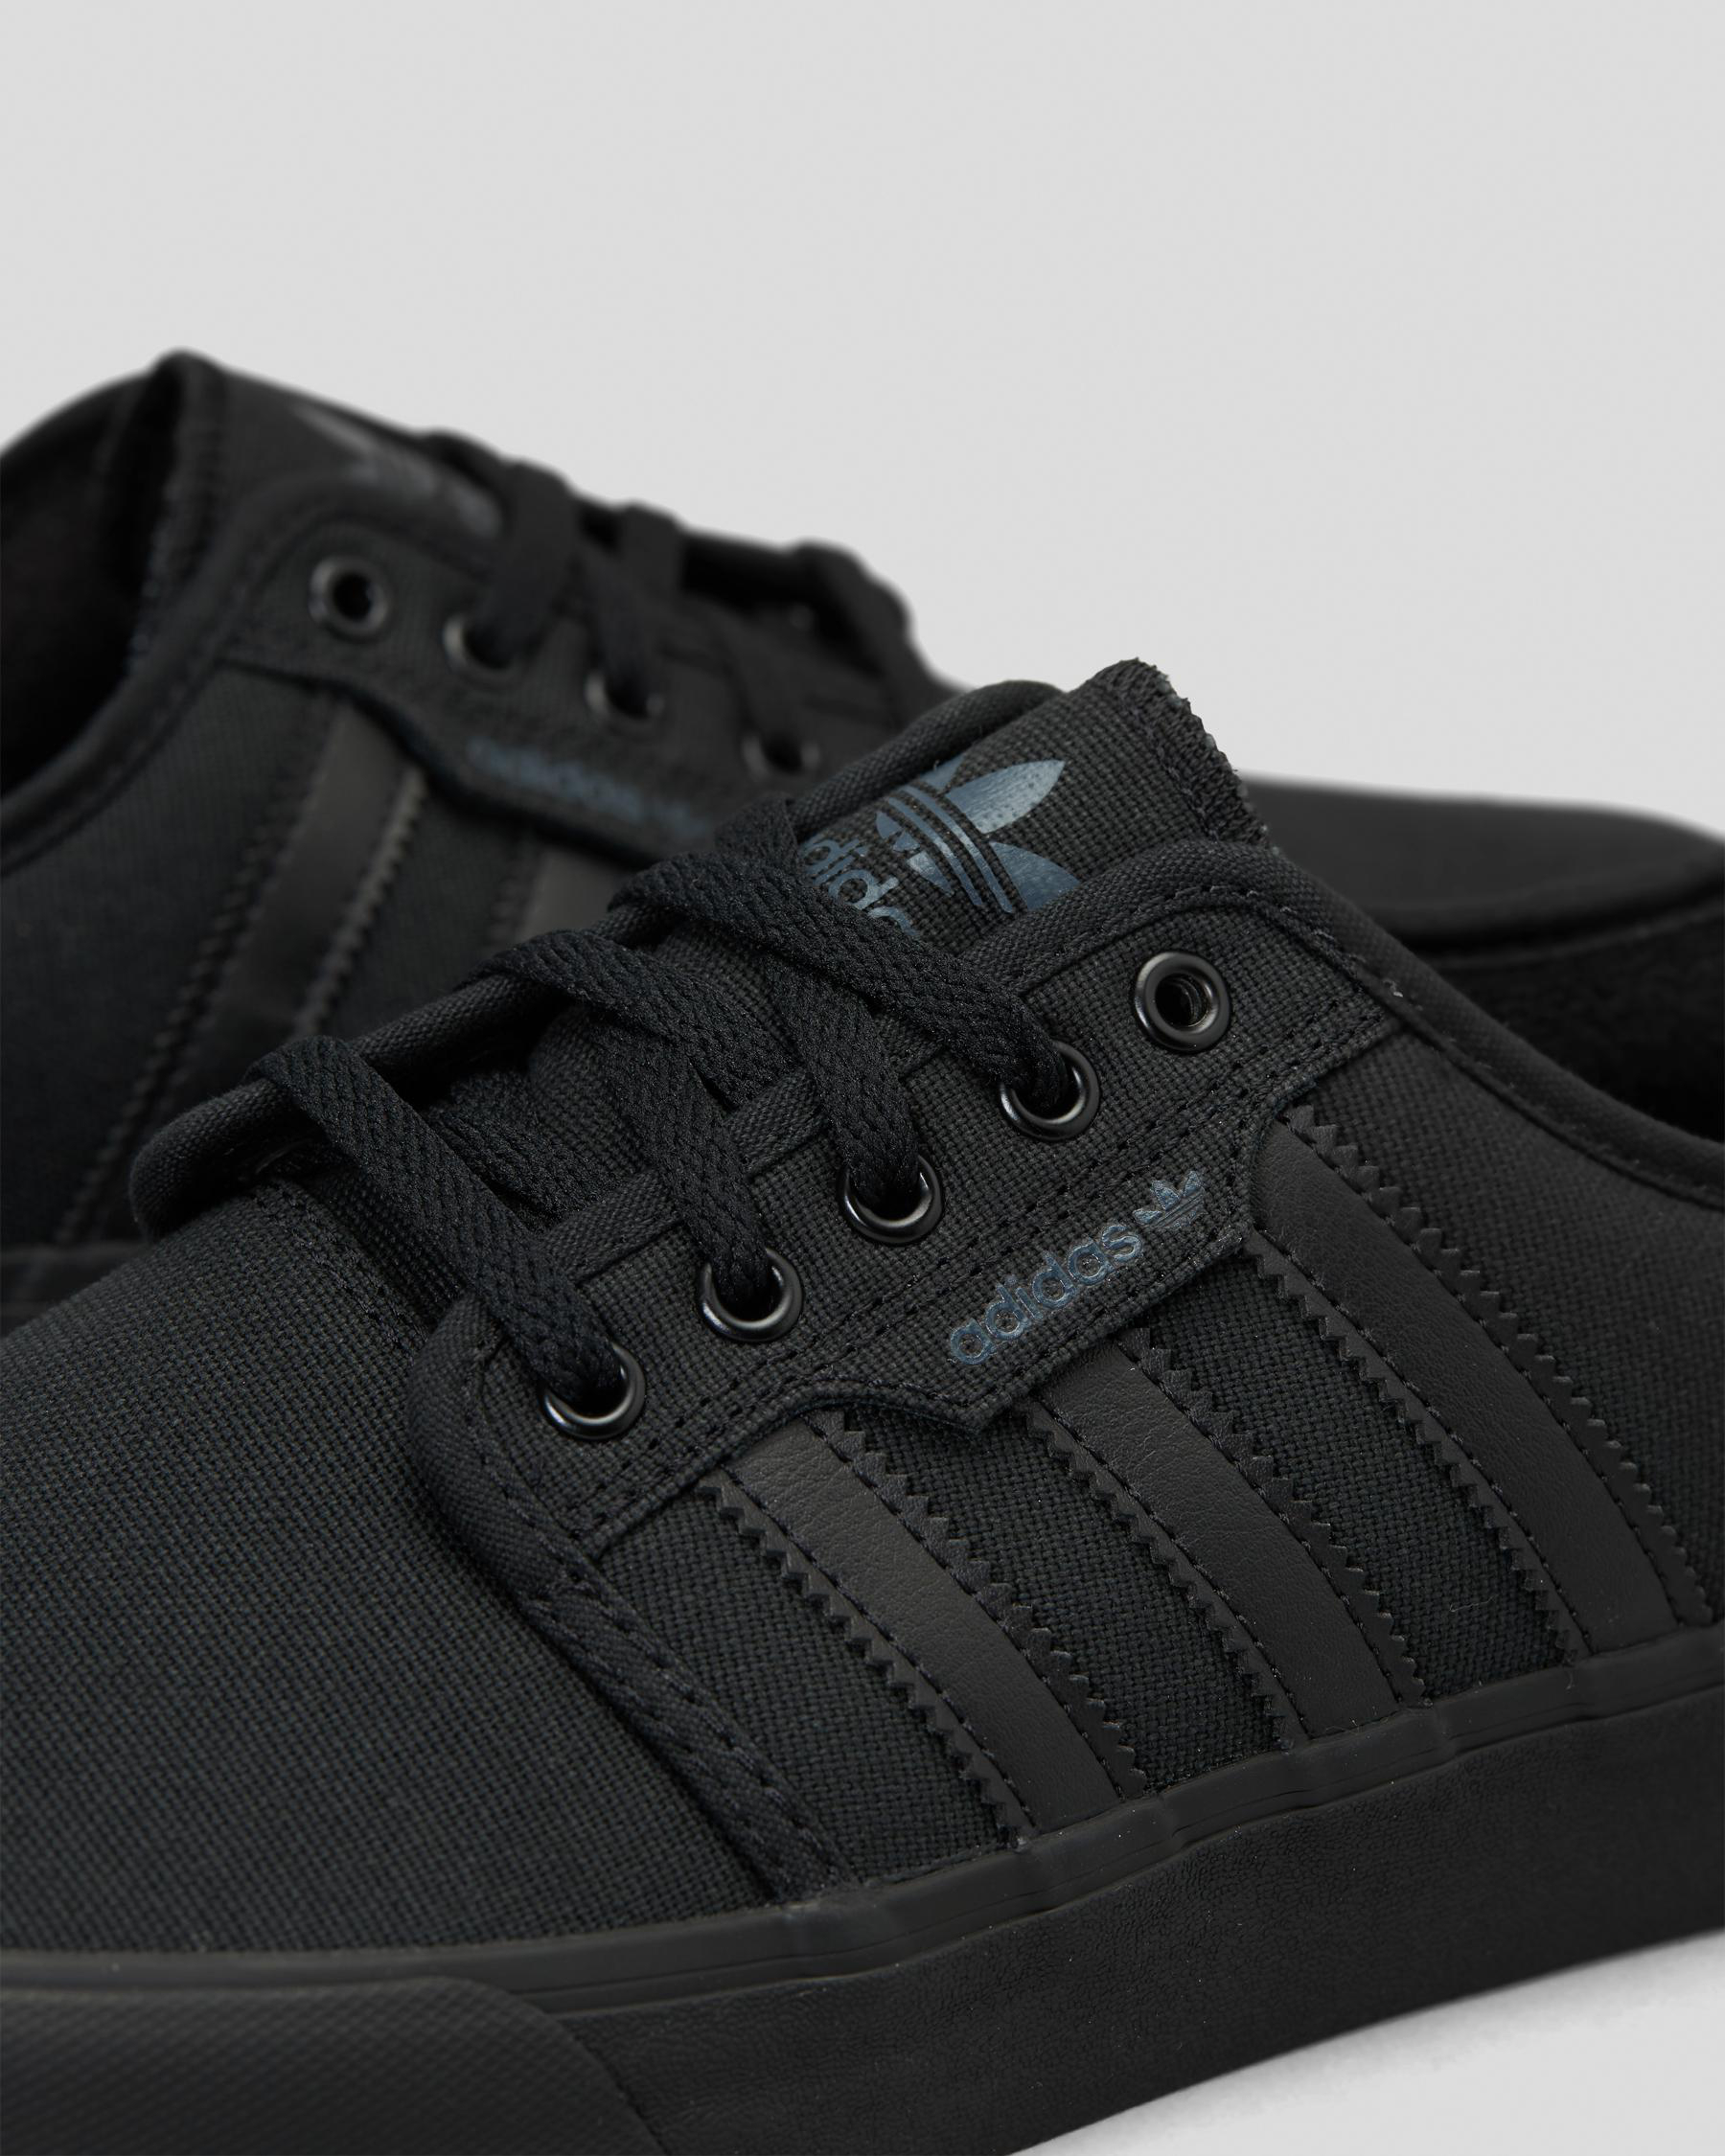 Adidas Seeley Shoes In Black/black - Fast Shipping Easy Returns - City Beach United